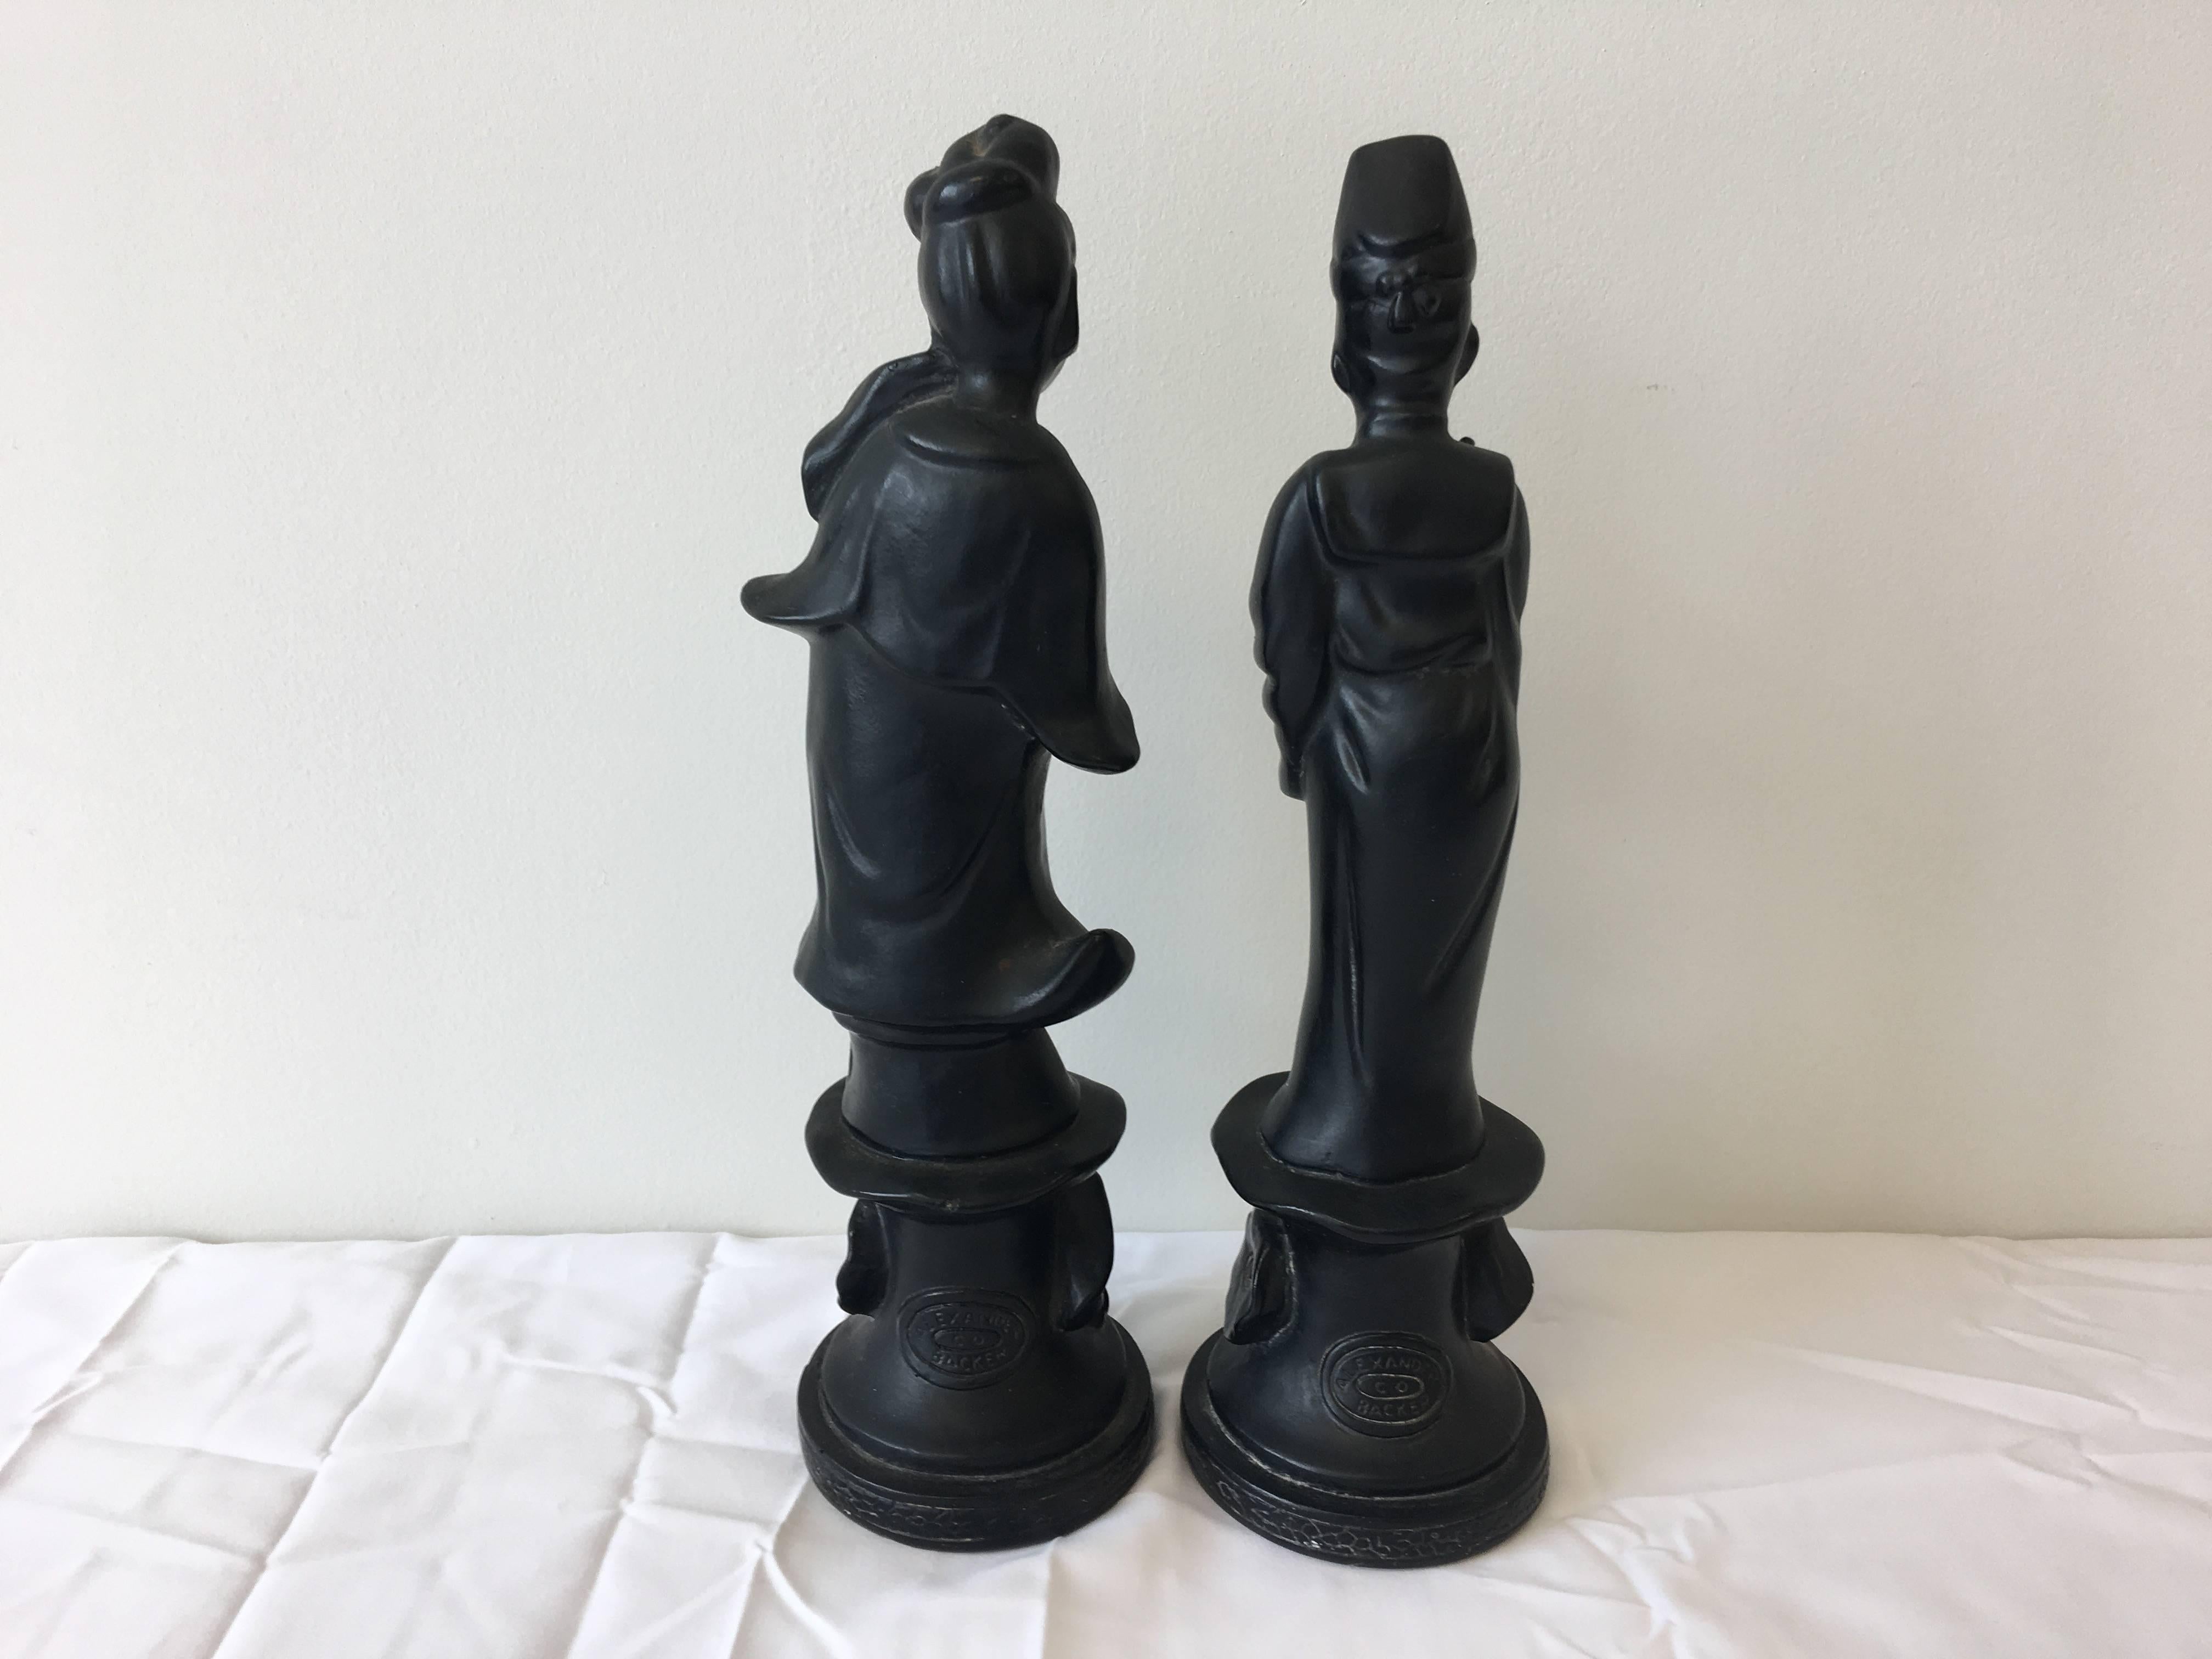 Chinoiserie Black Plaster Asian Figurines by Alexander Backer, Pair